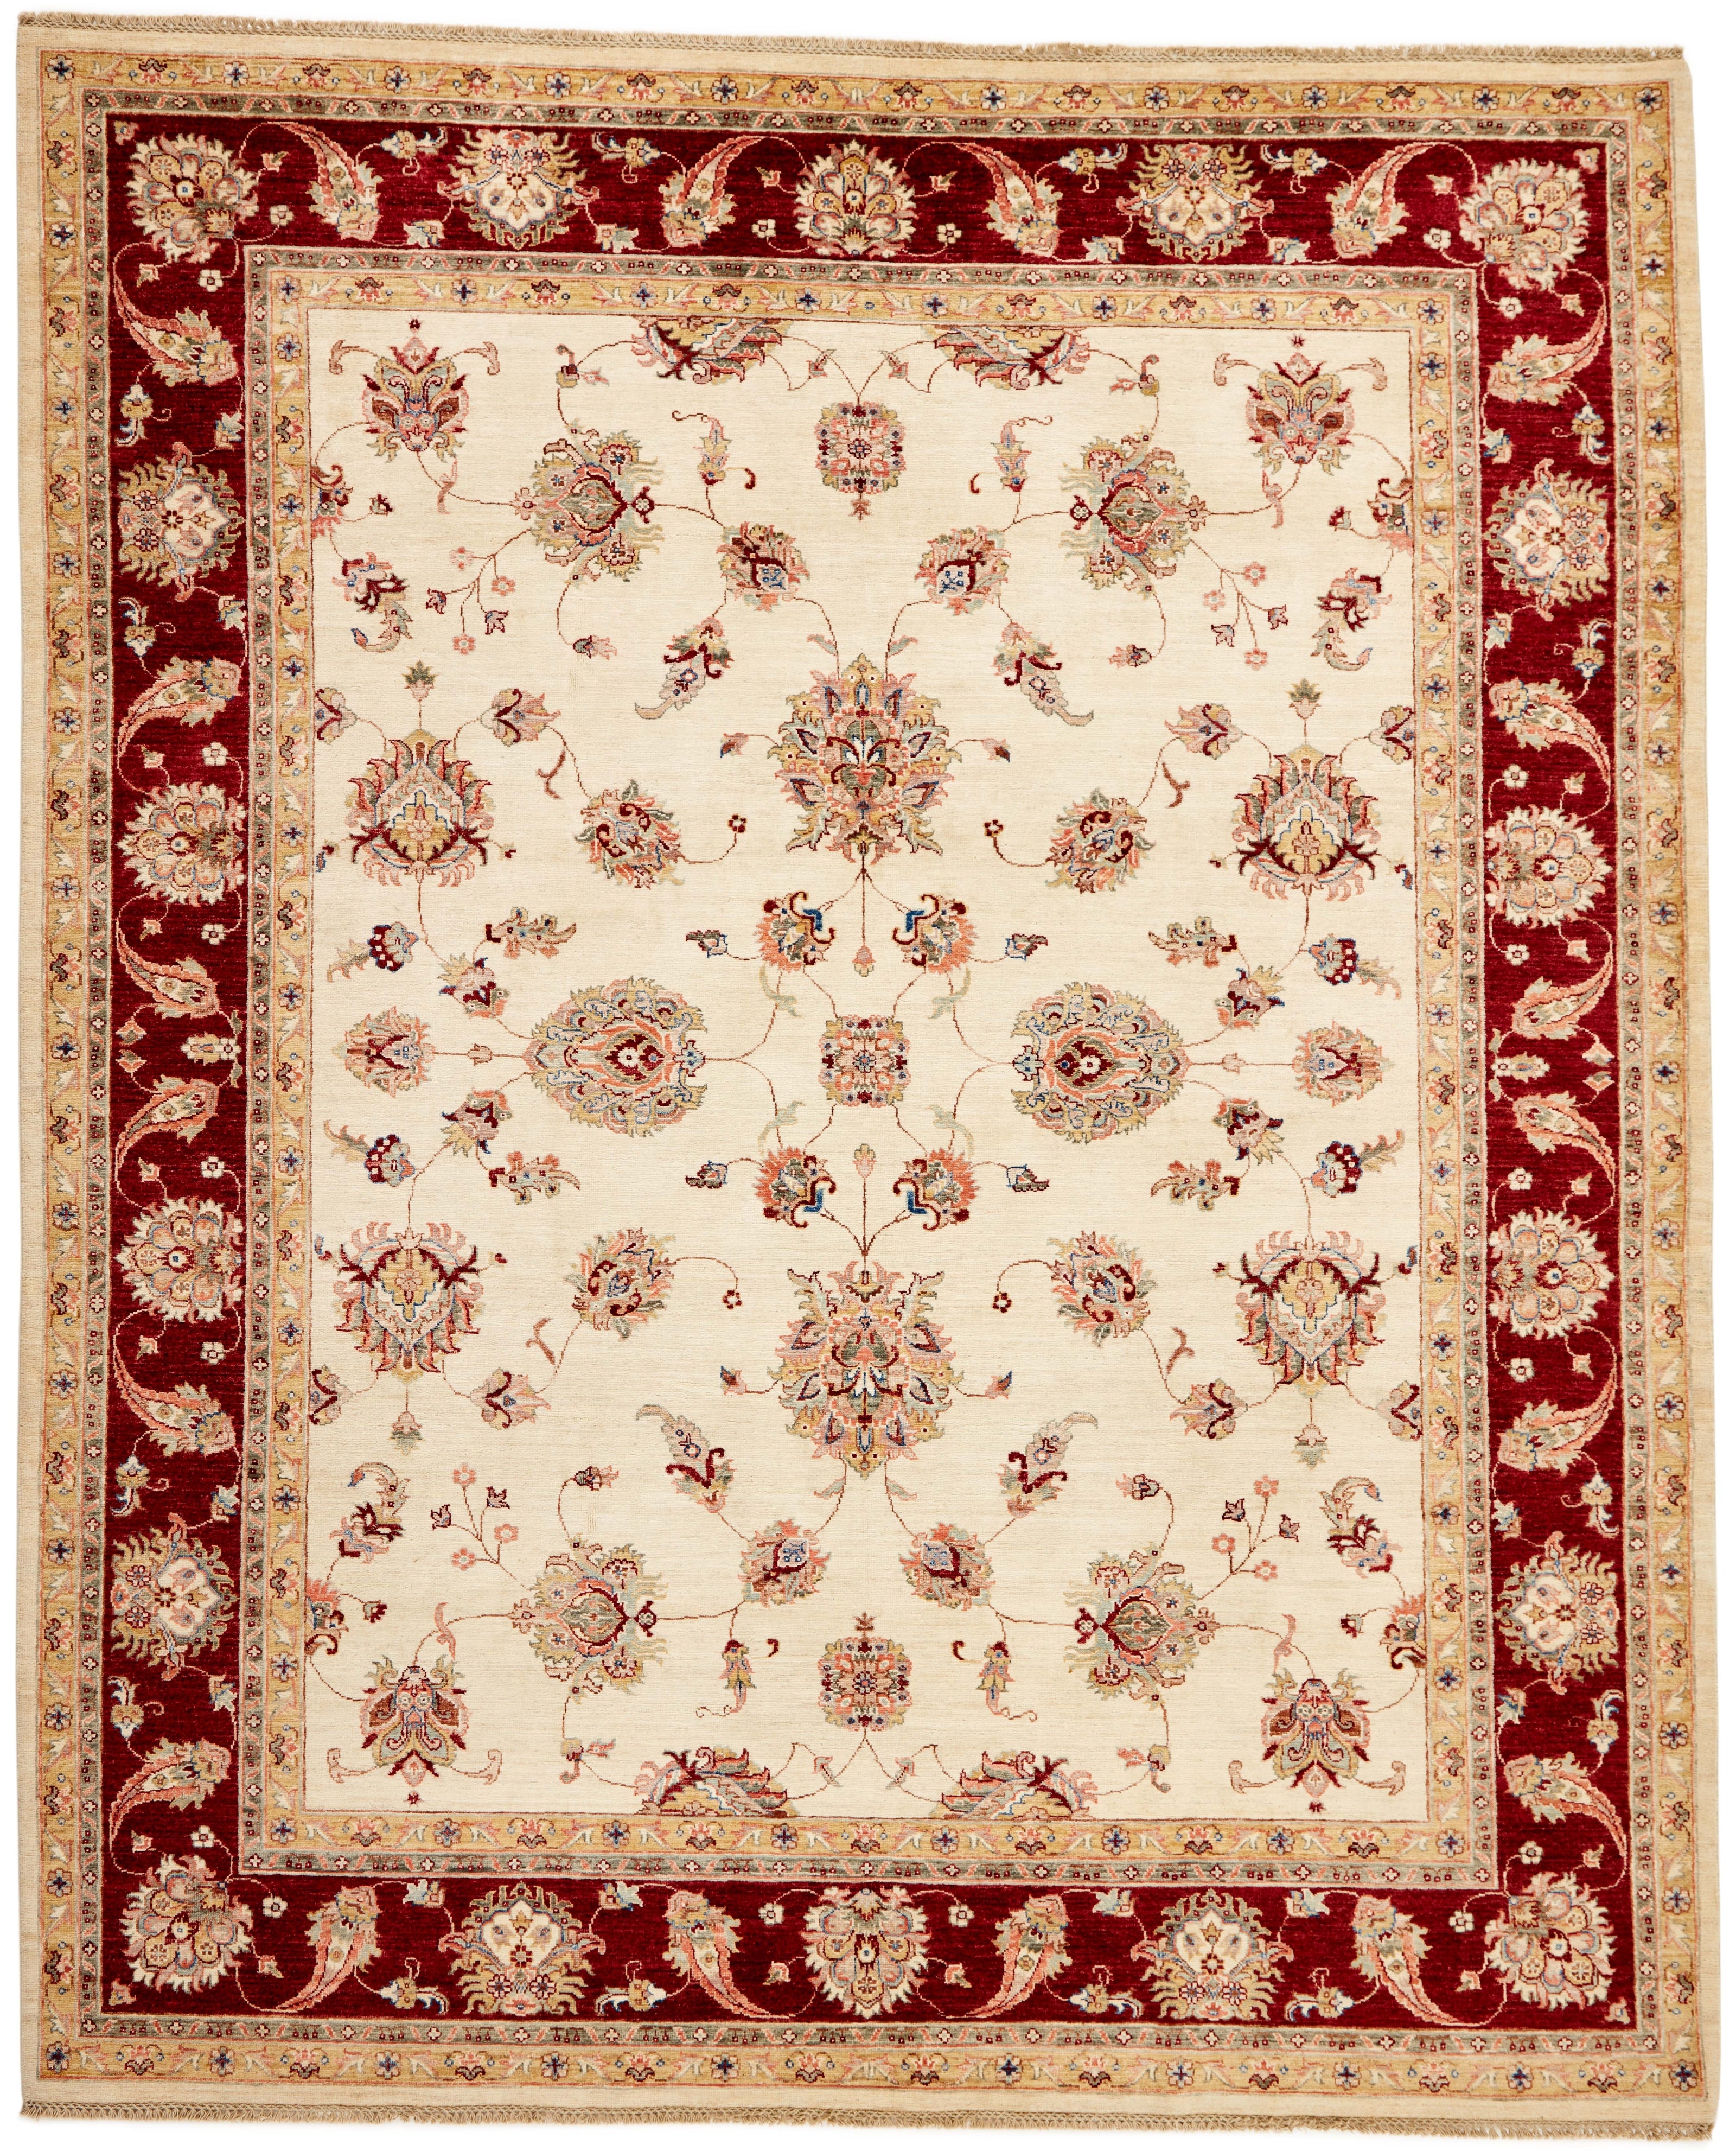 Authentic oriental rug with delicate floral pattern in red and ivory